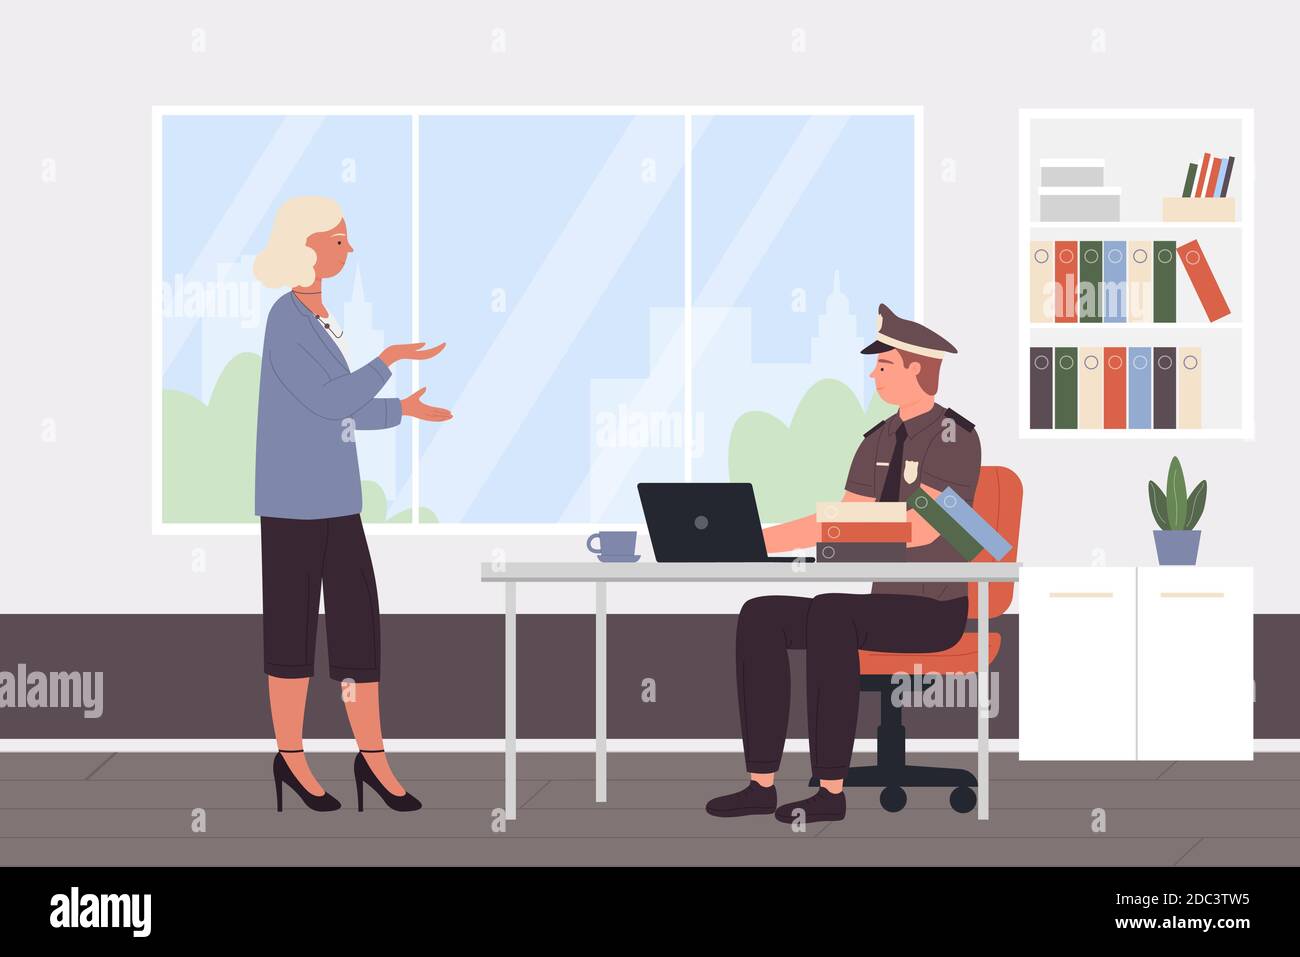 Police officer work vector illustration. Cartoon policeman character sitting at desk in police station cabinet room interior and working with woman visitor, workplace of detective worker background Stock Vector